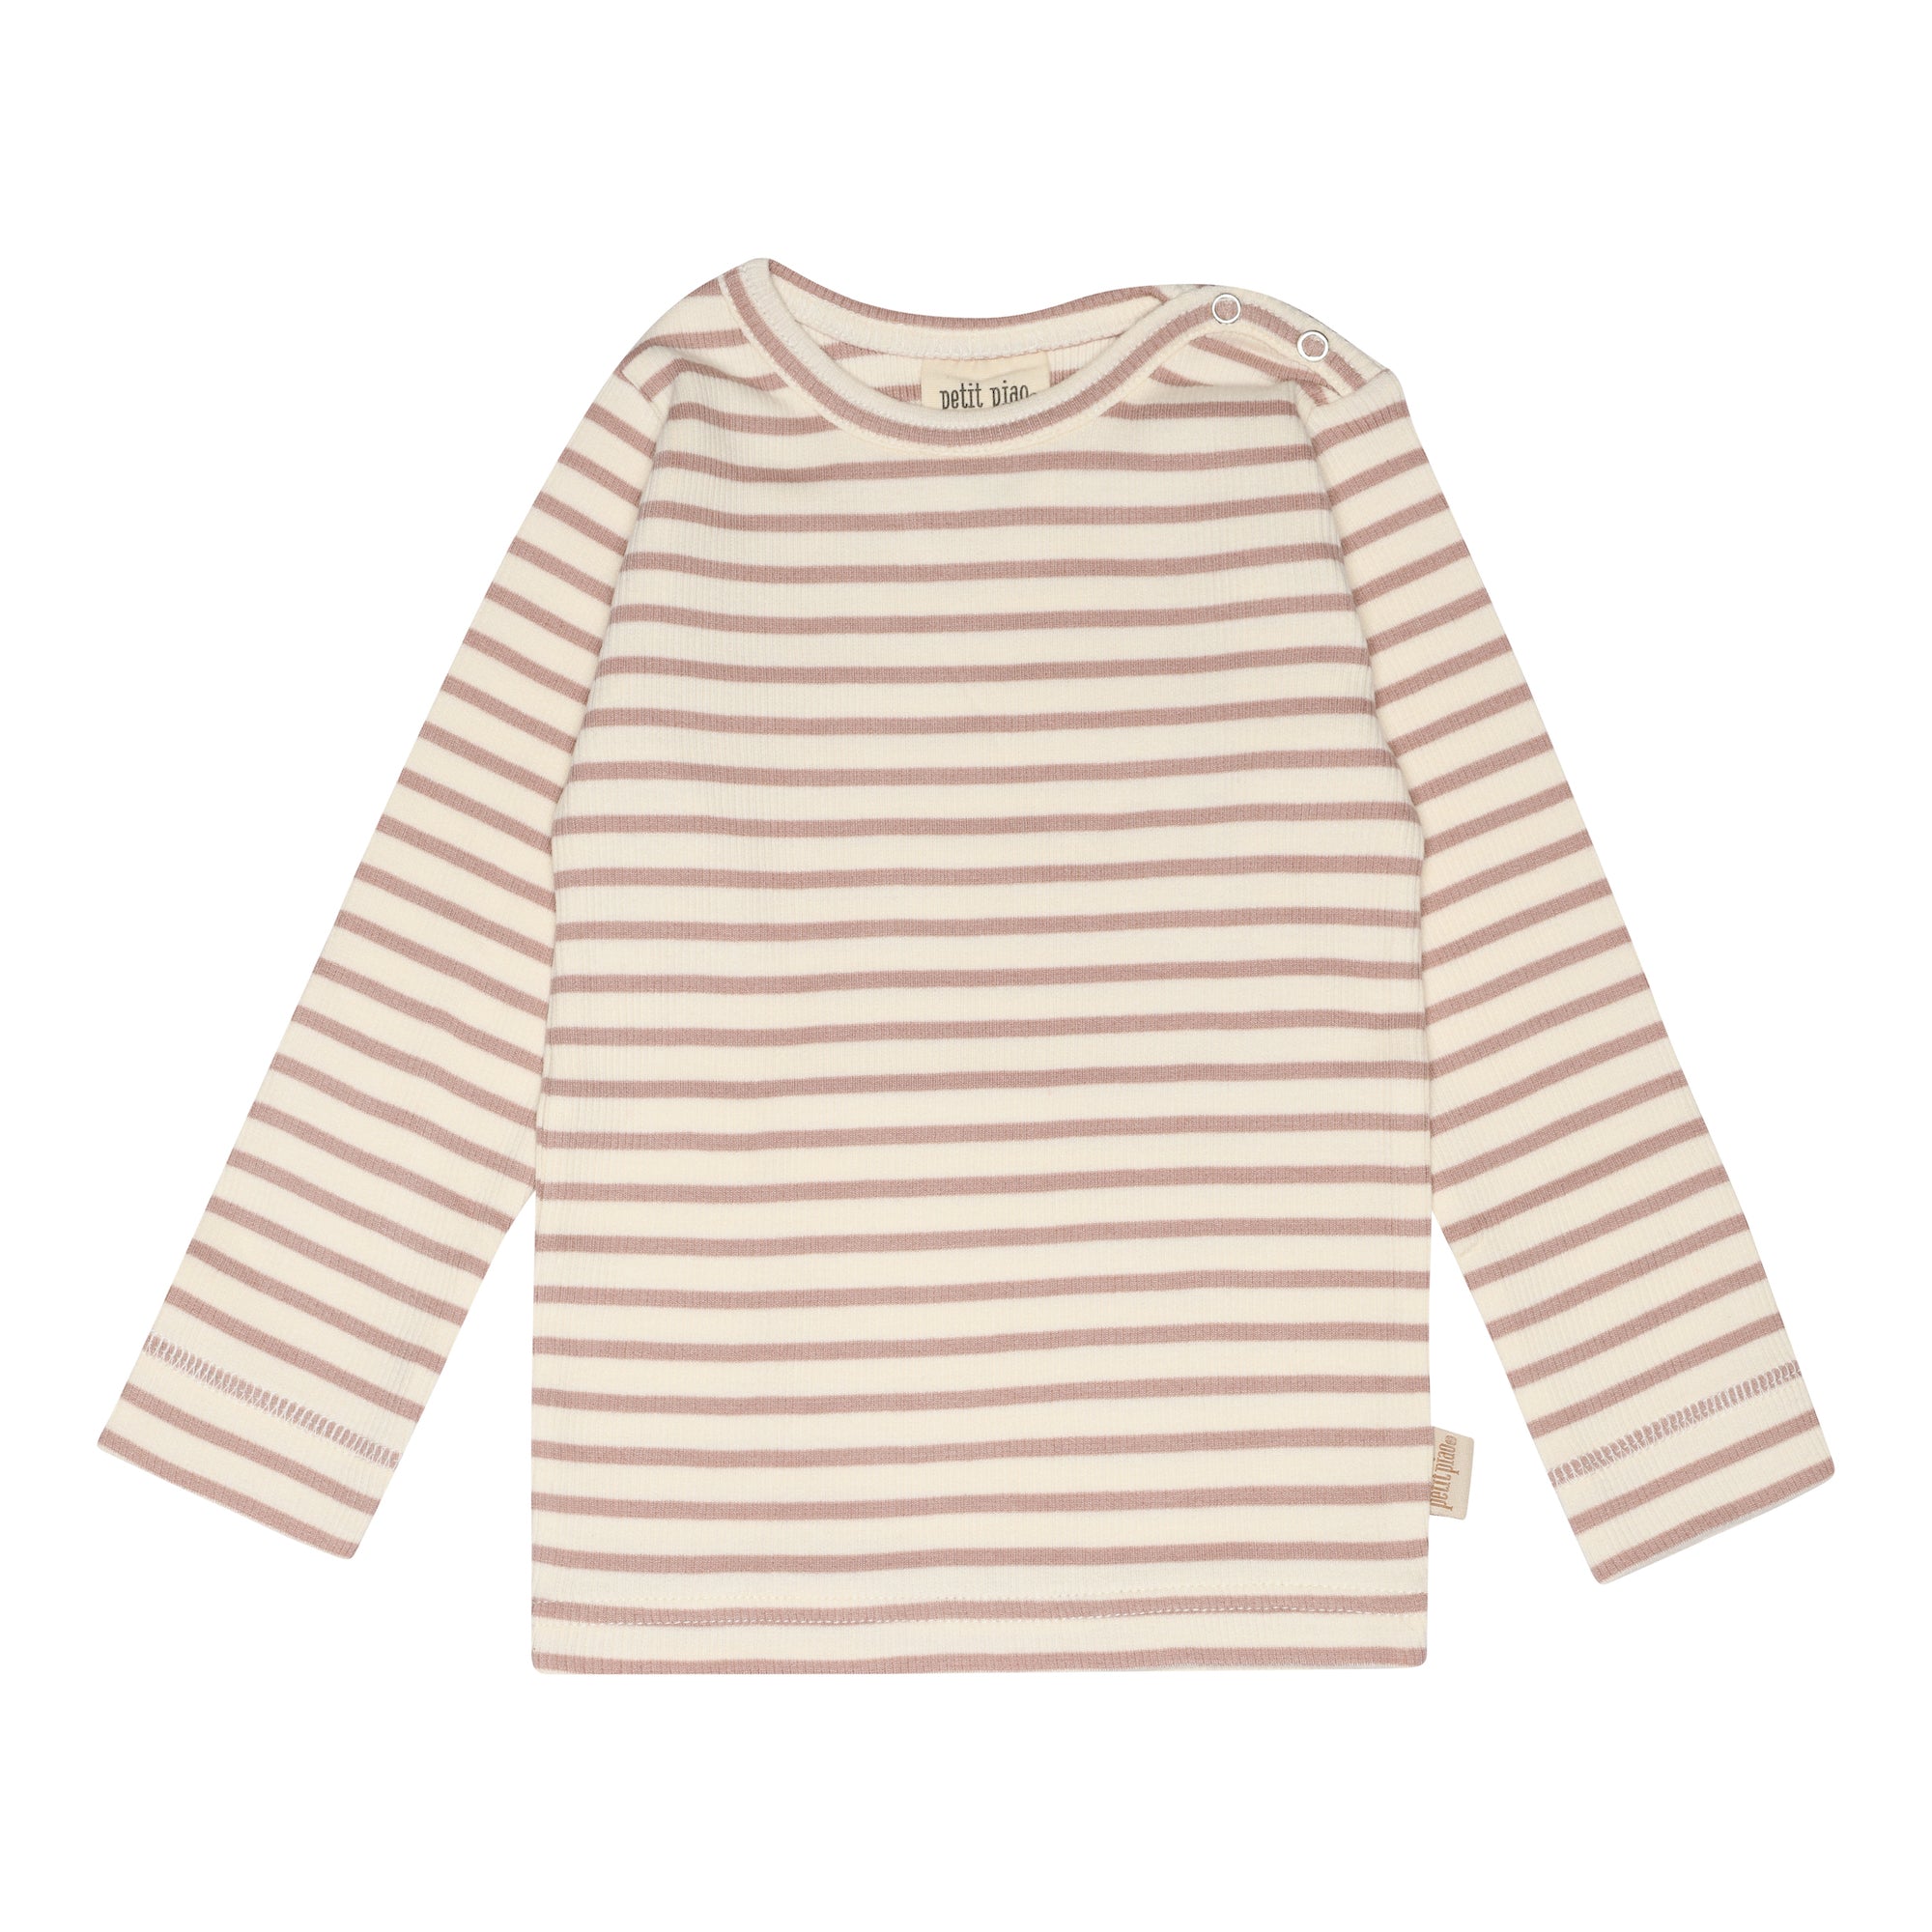 Petit Piao - T-shirt LS Modal Striped, PP303 - Adobe Rose / Offwhite